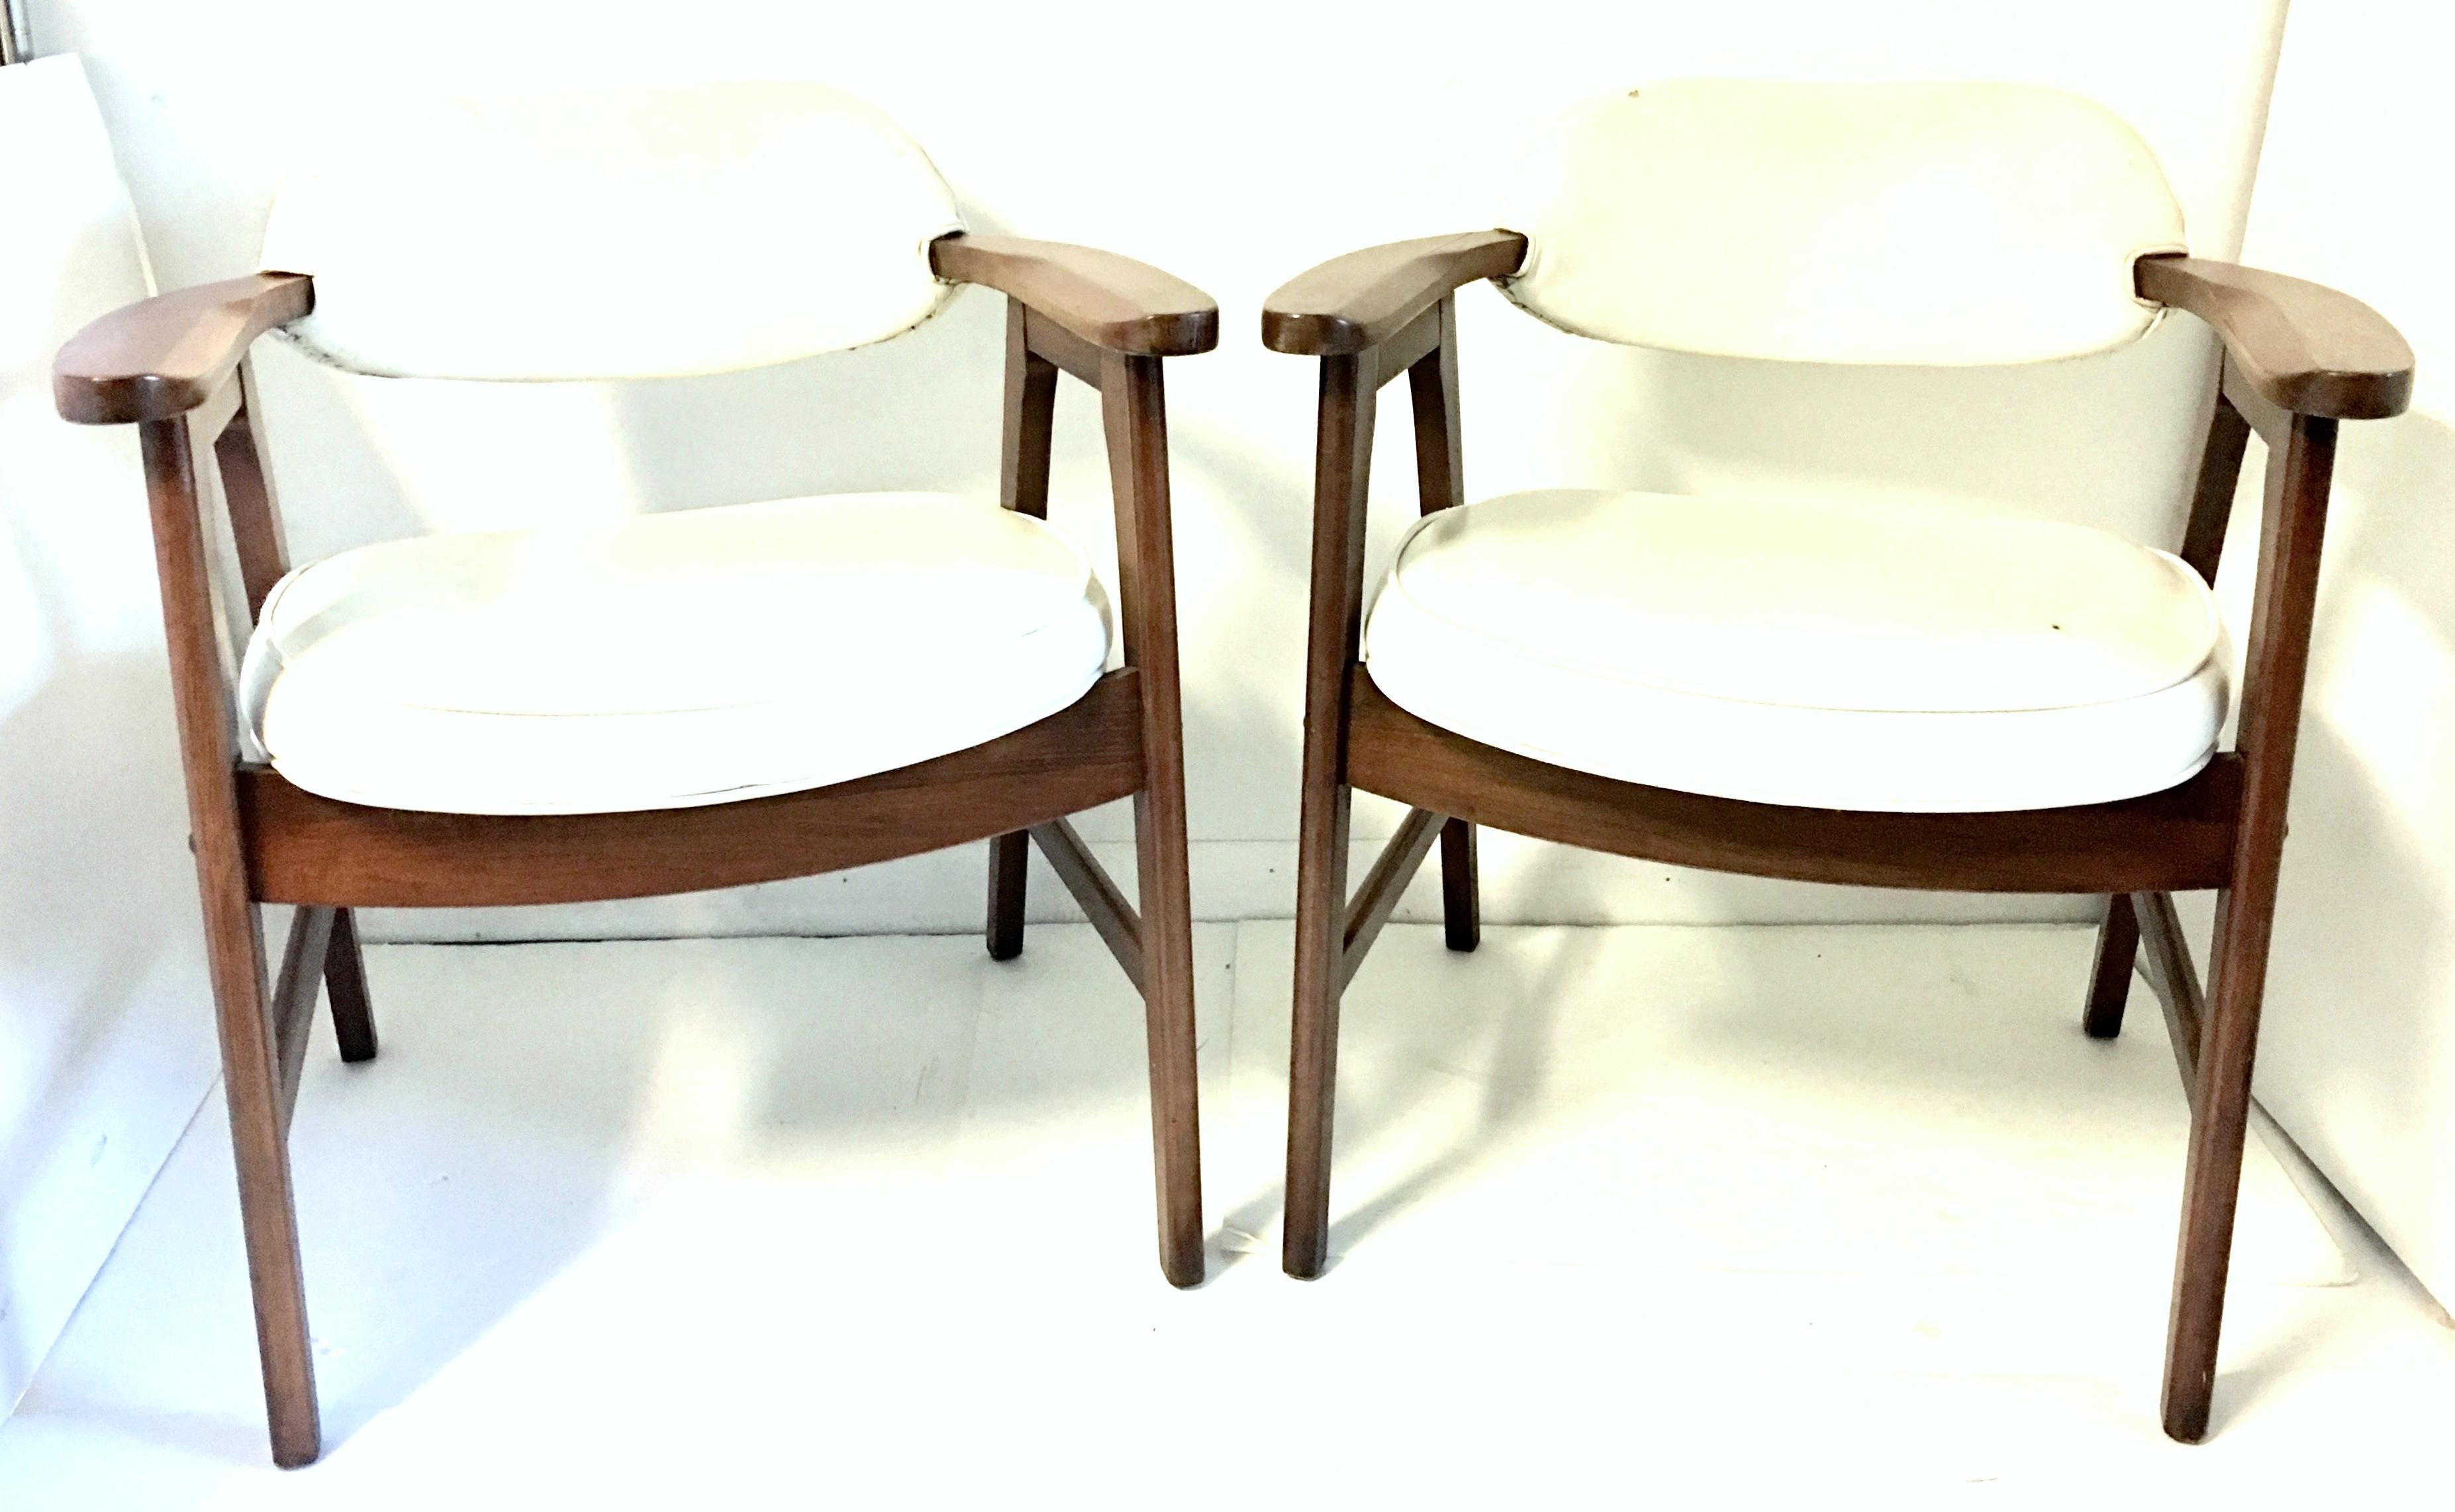 Quintessential Mid-Century Modern pair of two Jerry Johnson style, walnut upholstered armchairs. Fantastic satin finish using walnut rivet detail construction. Fabric is white faux leather, self welt with a nail head detail on upper back.
Measures: